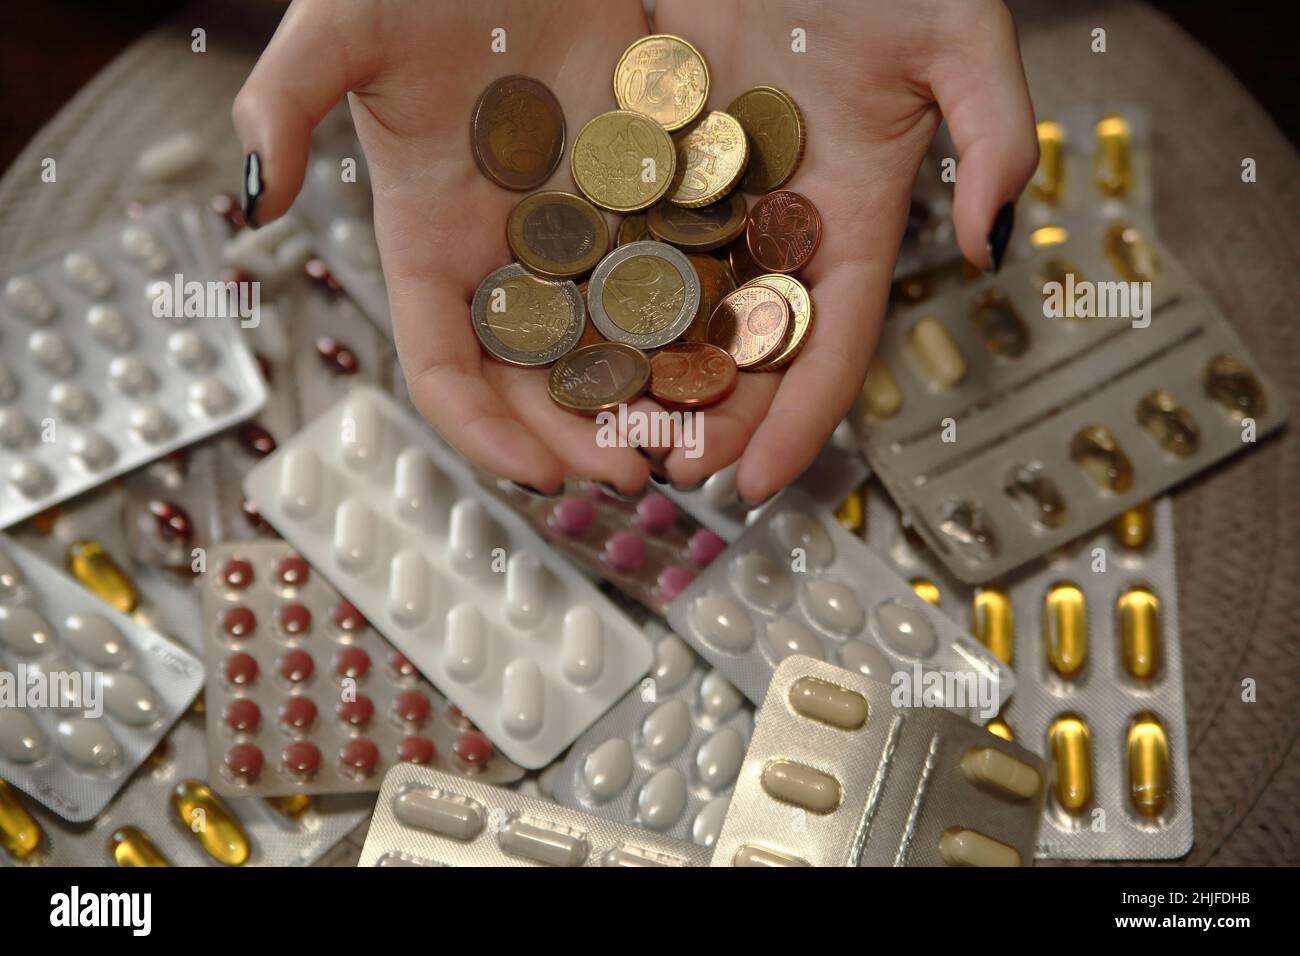 Euro coins in female hands over many blisters of pills, drugs, tablets and capsules Stock Photo